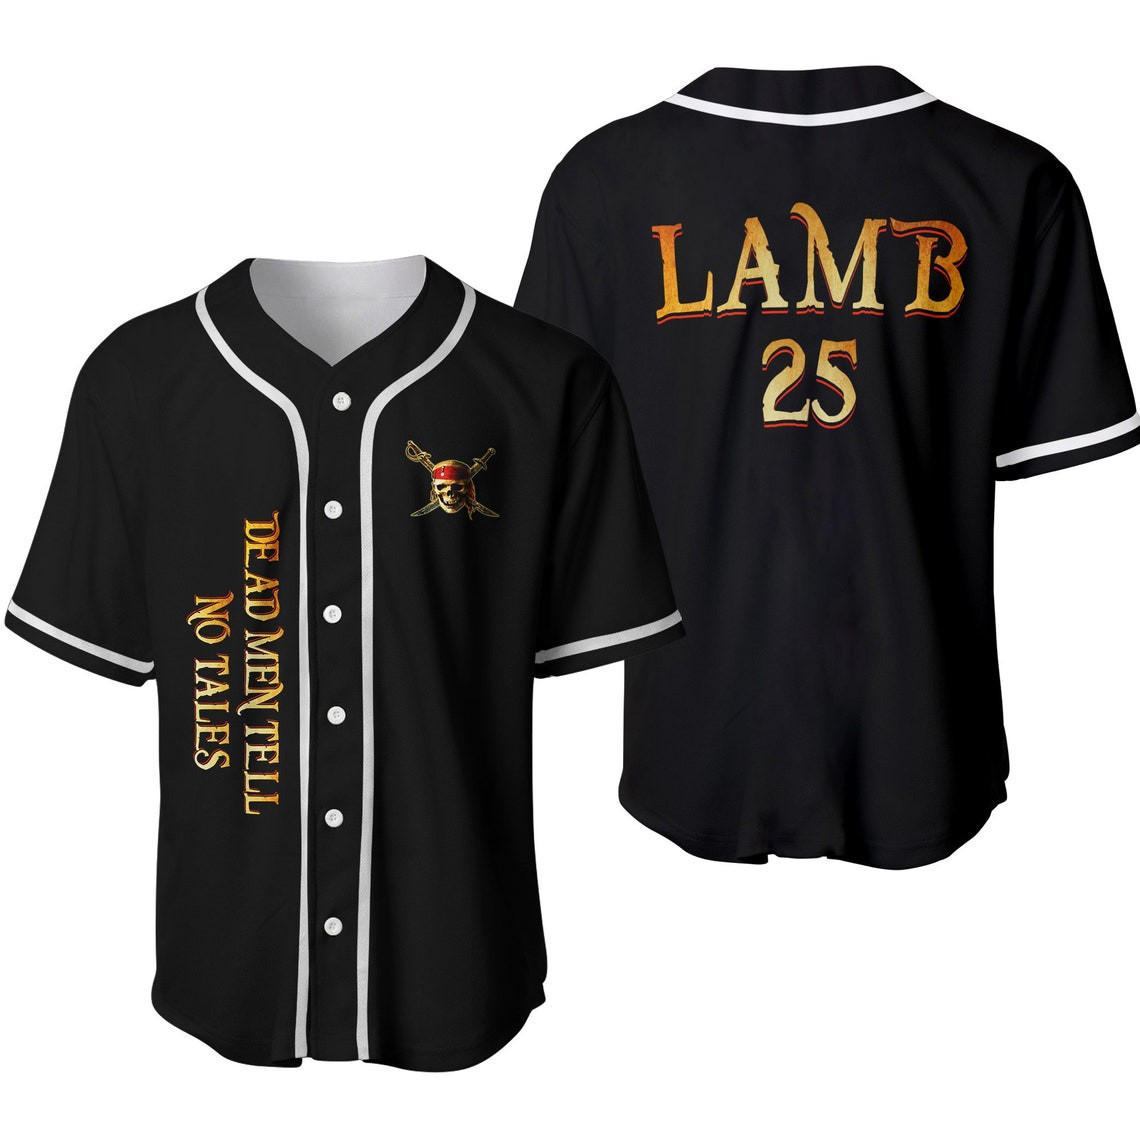 Your Name And Your Image Front Back Full Print Unisex Custom Baseball Jersey Personalized Shirt Men Women